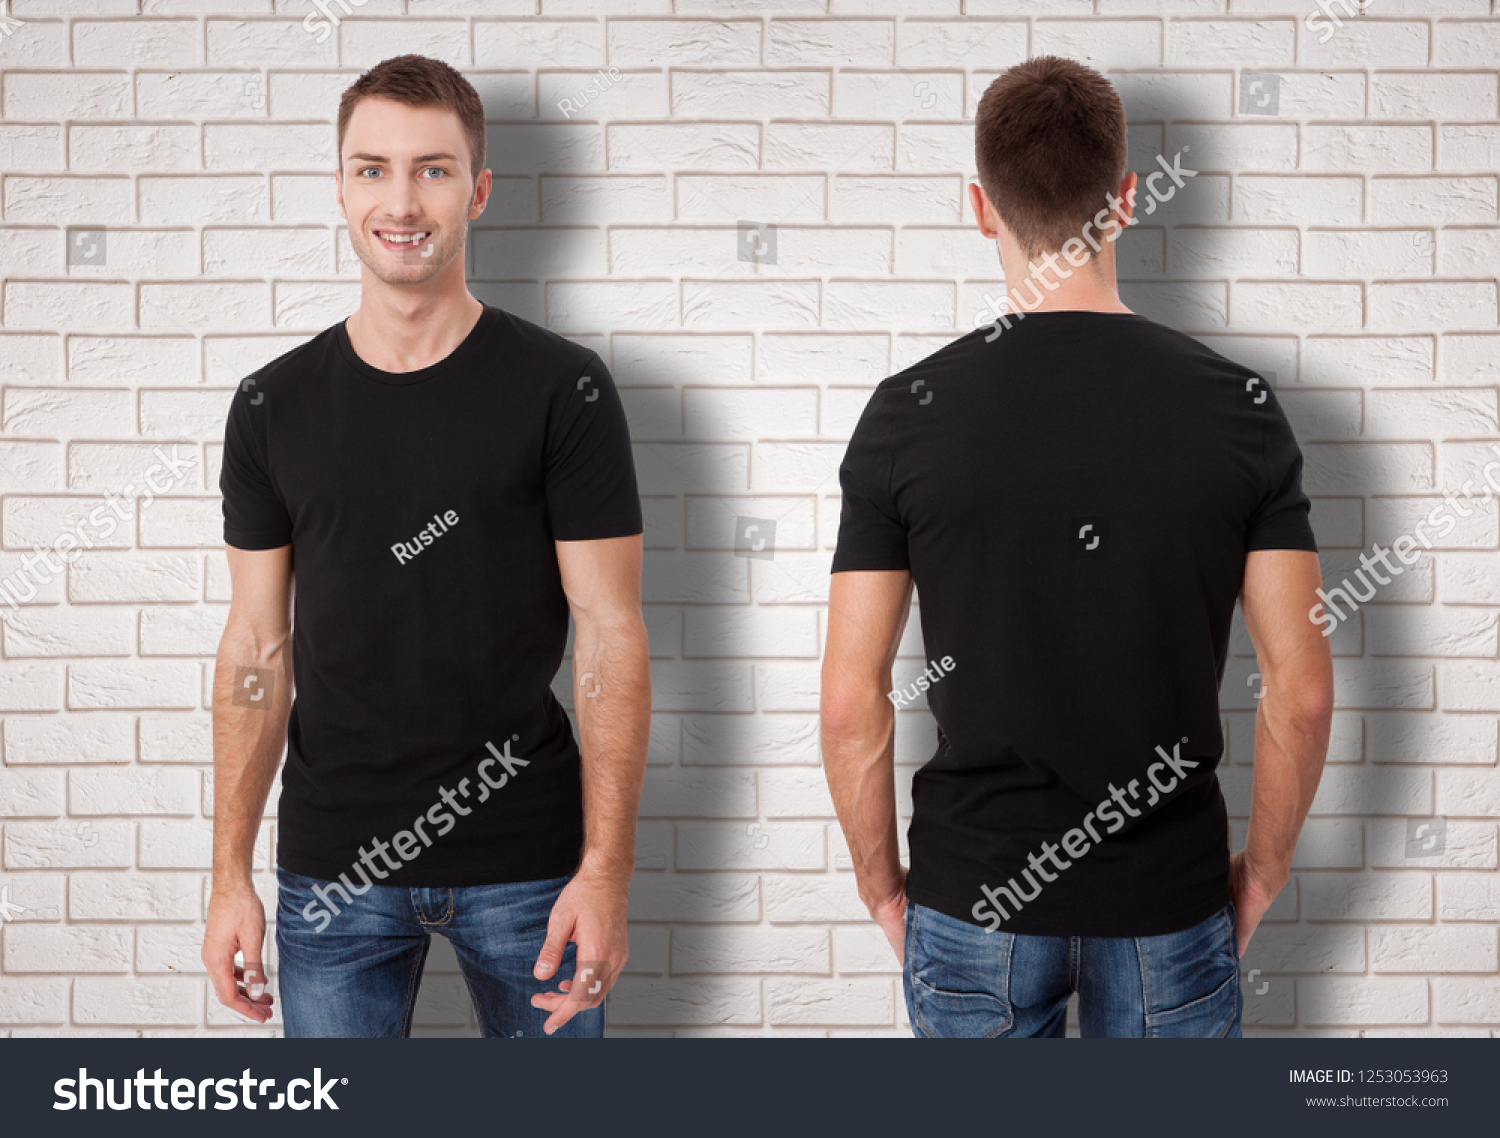 Shirt Design People Concept Close Young Stock Photo 1253053963 ...